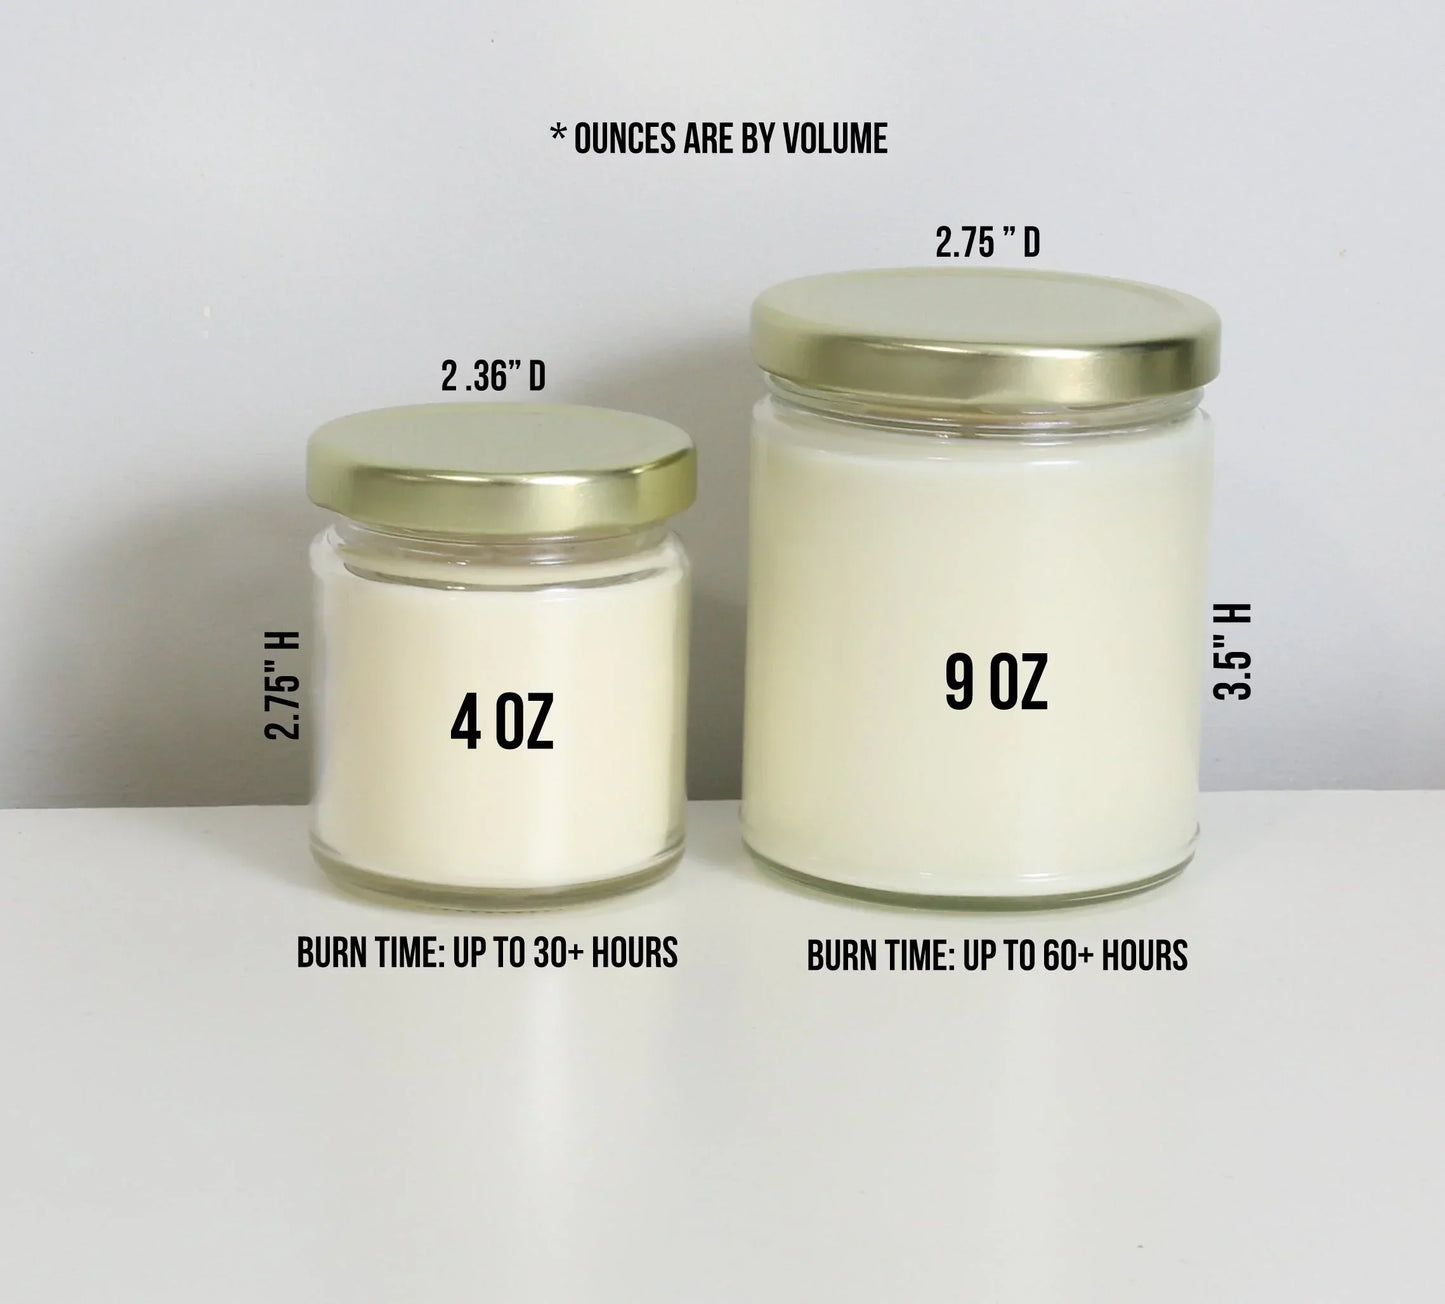 Birthday Gift For Son or Daughter - I Made This Day Possible You're Welcome Happy Birthday Soy Candle - Choose Your Scent